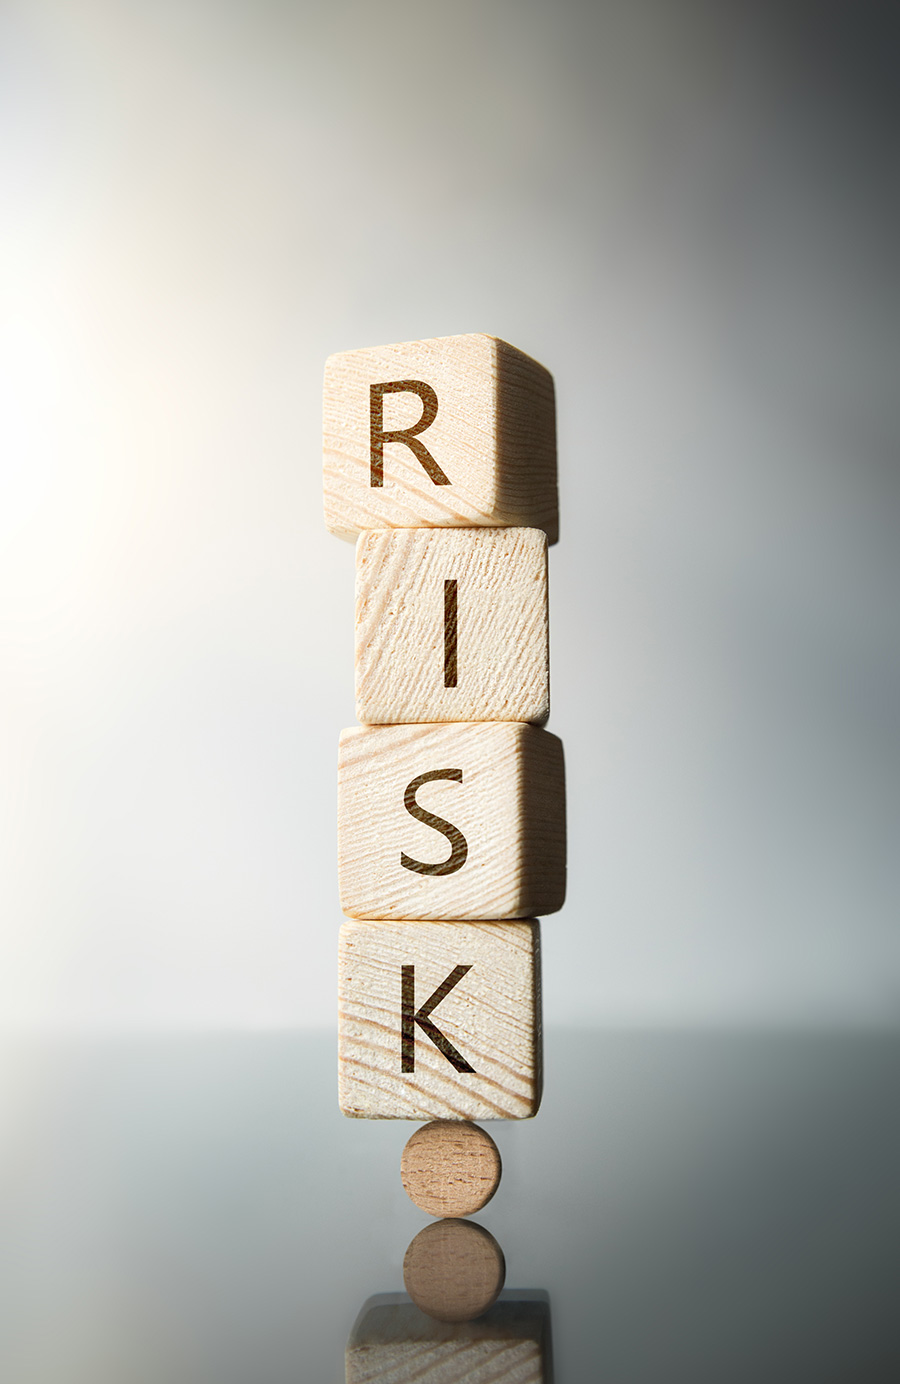 It is not possible to eliminate or mitigate all risk